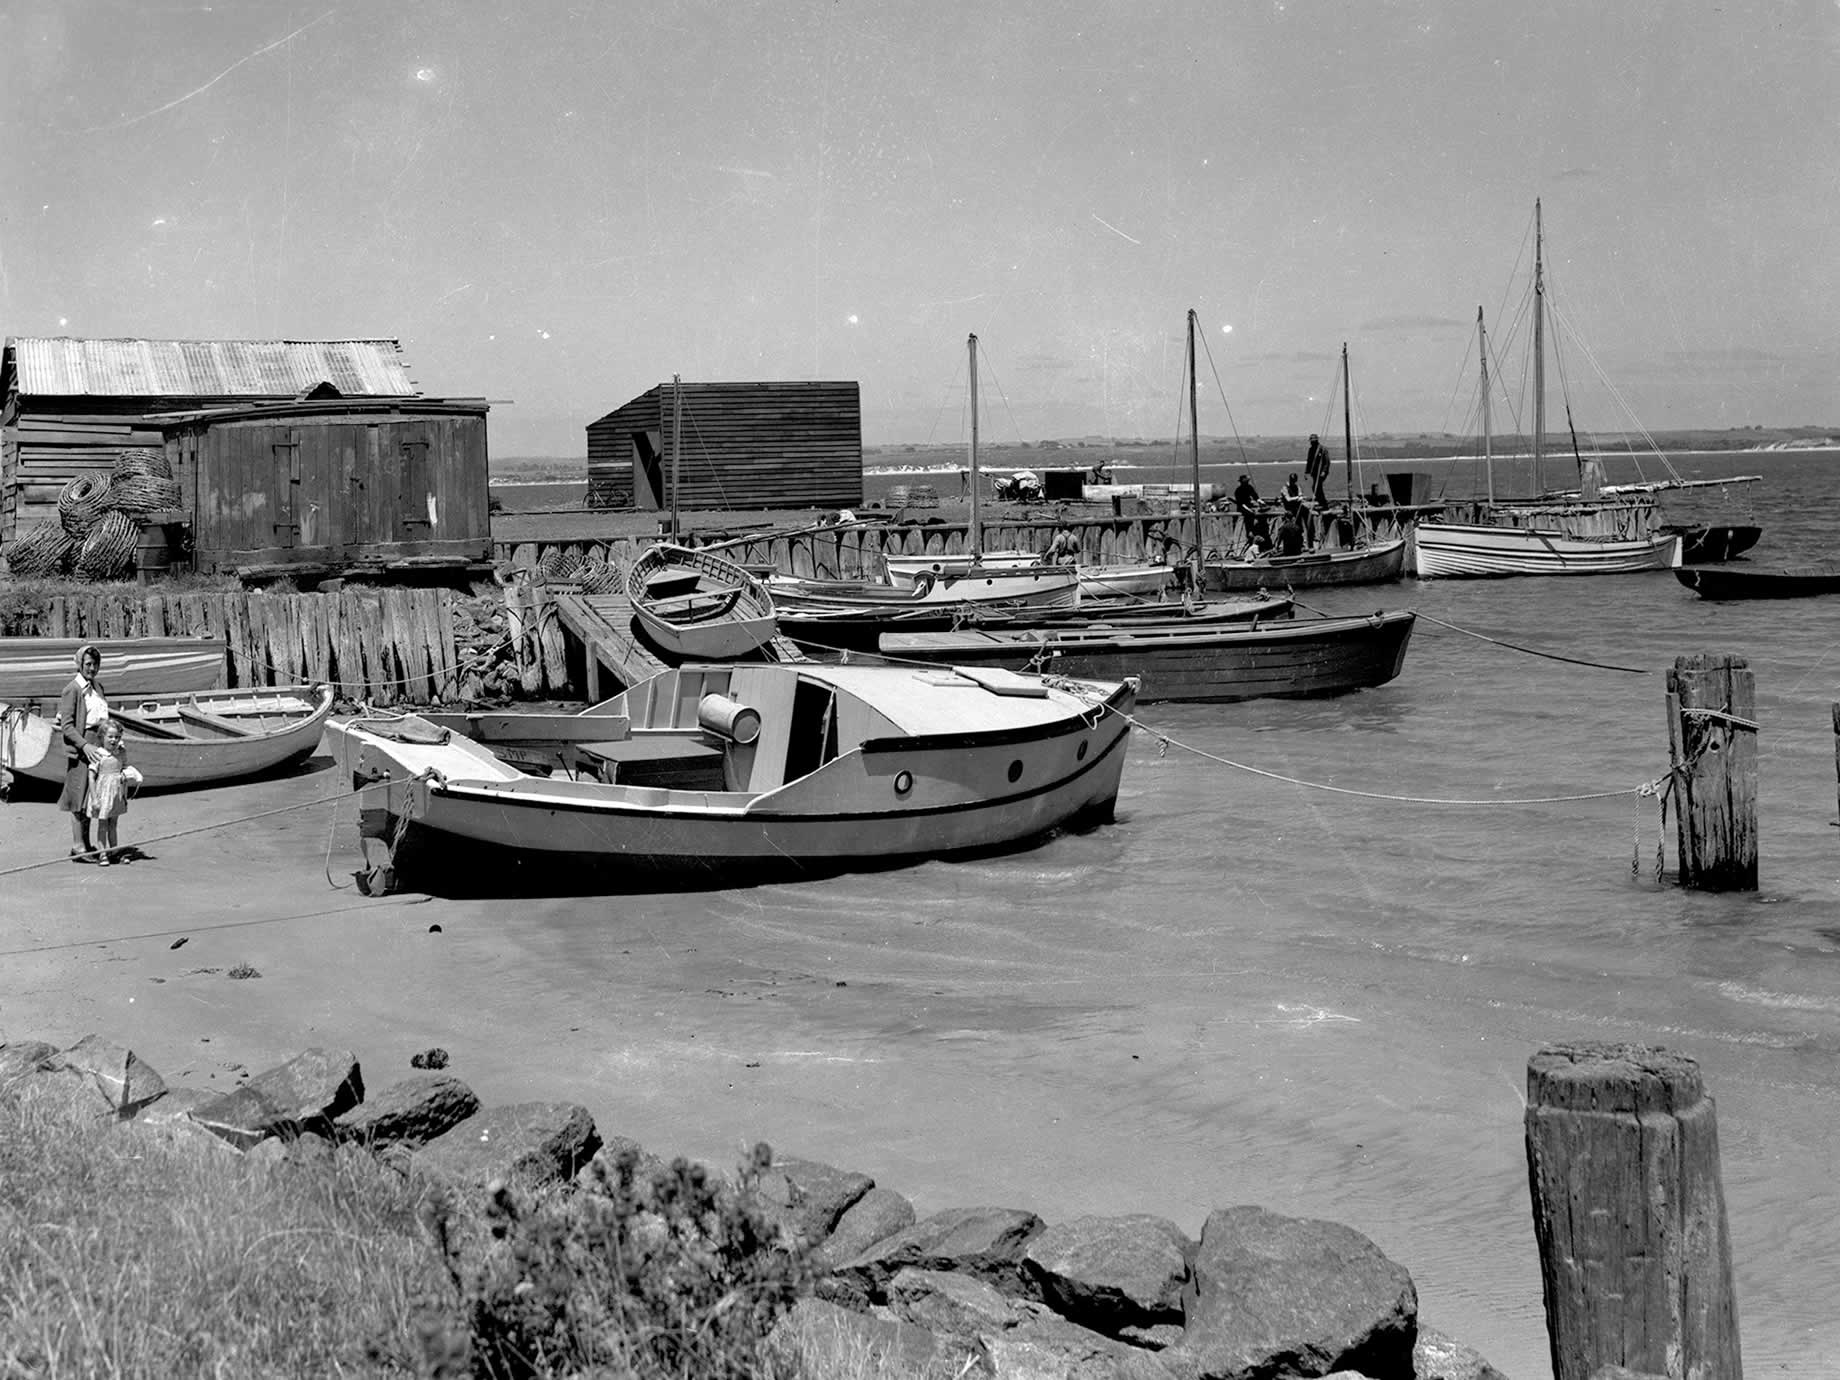 Many fishing boats tied up at the Old wharf, with smaller boats in foreground